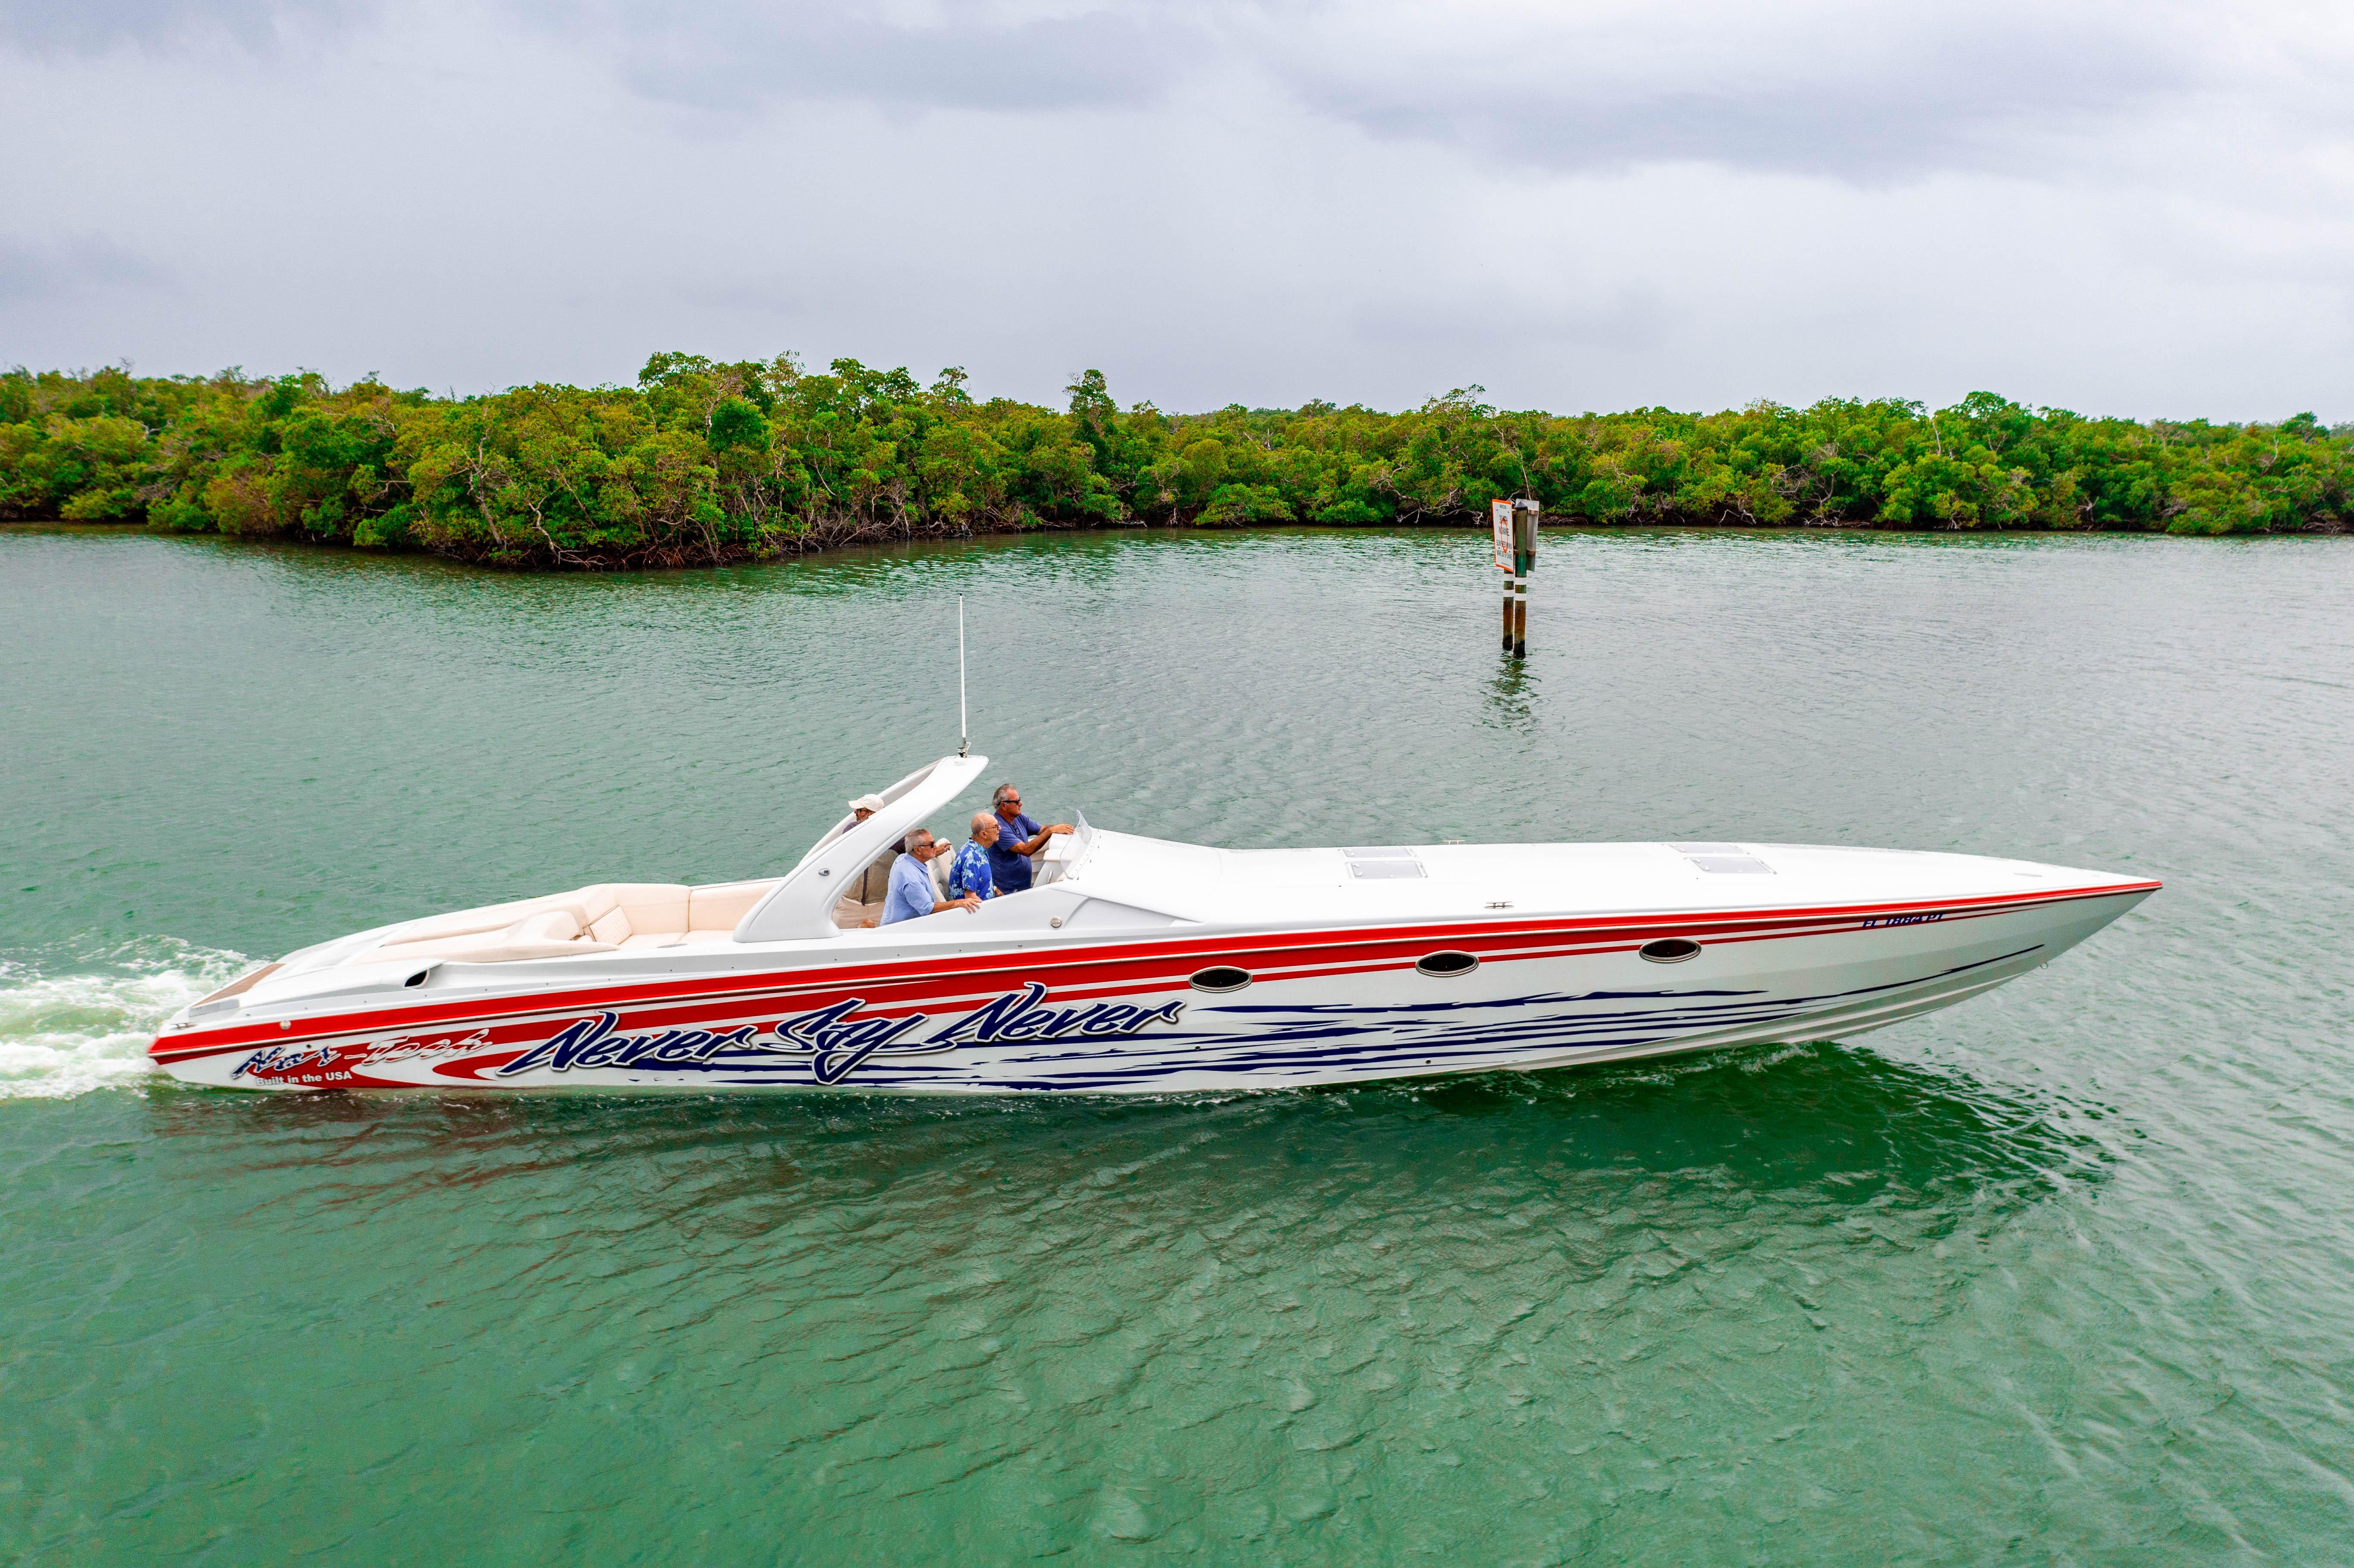 High Performance boats for sale - 5 of 35 pages - Boat Trader